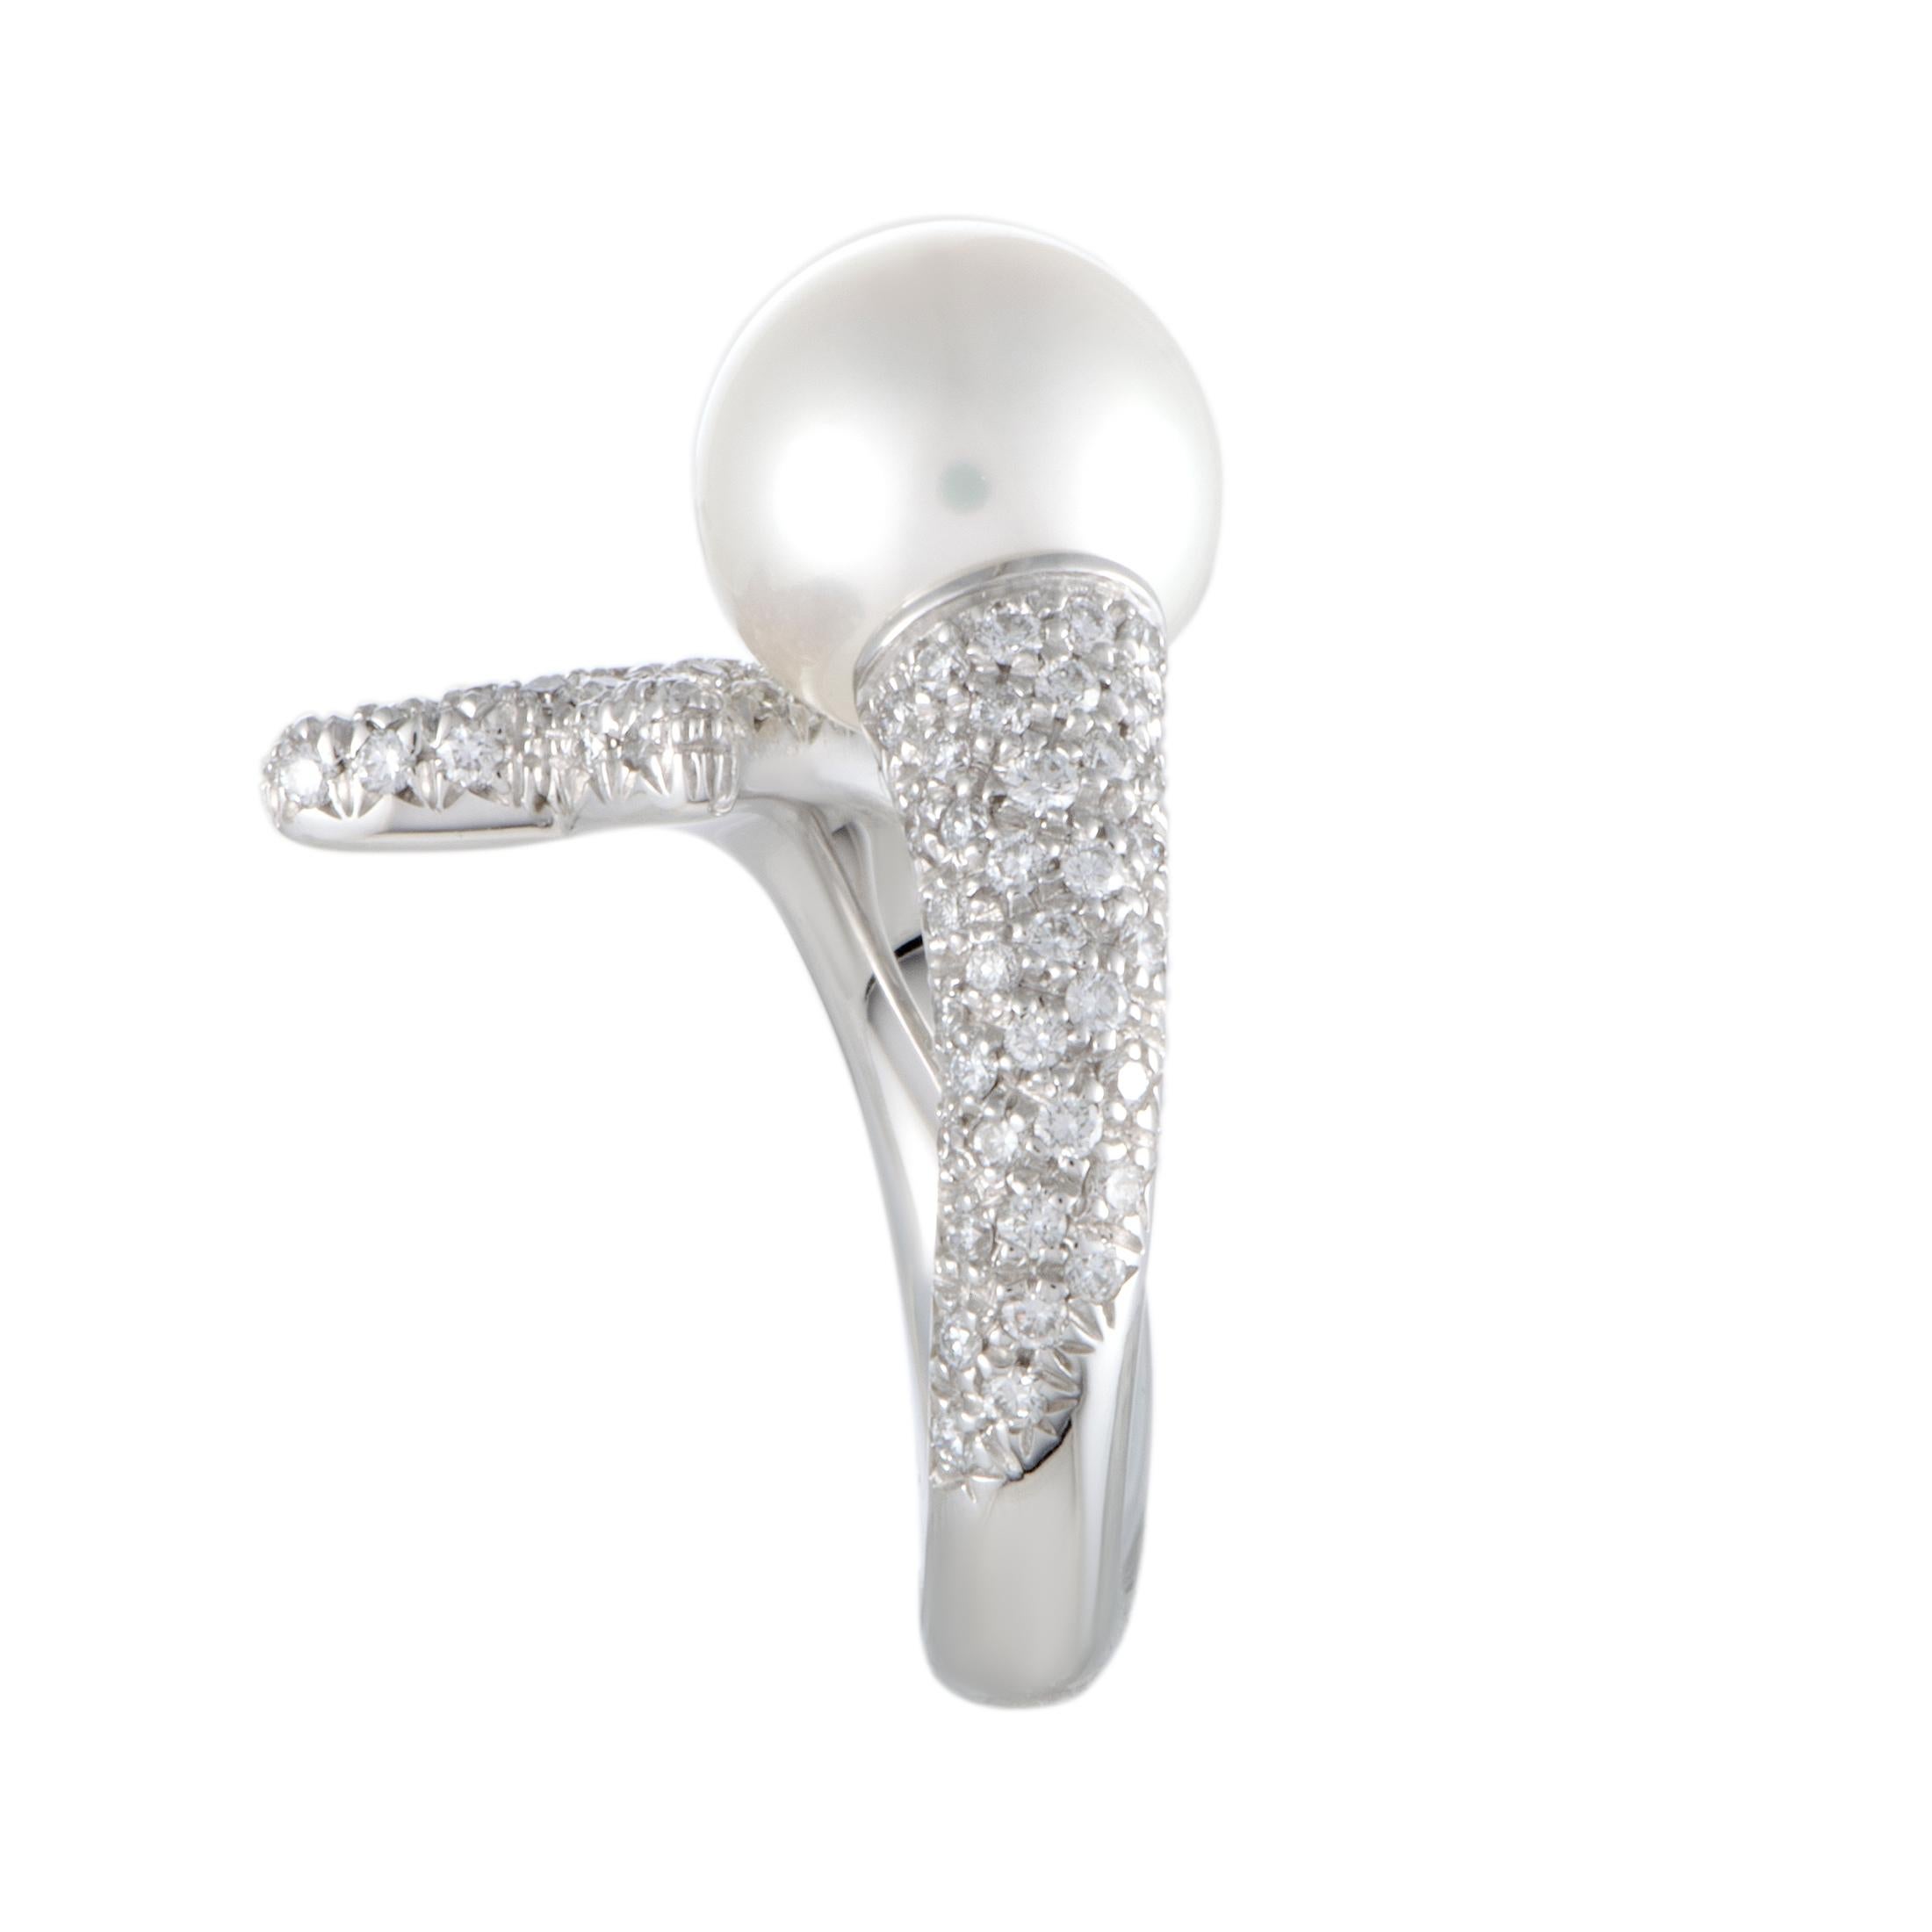 A wonderful sense of sublime femininity is present in this gorgeous ring that compels with its splendidly elegant design and incredibly lustrous décor. The ring is created by Mikimoto and it is exquisitely crafted from prestigiously gleaming 18K